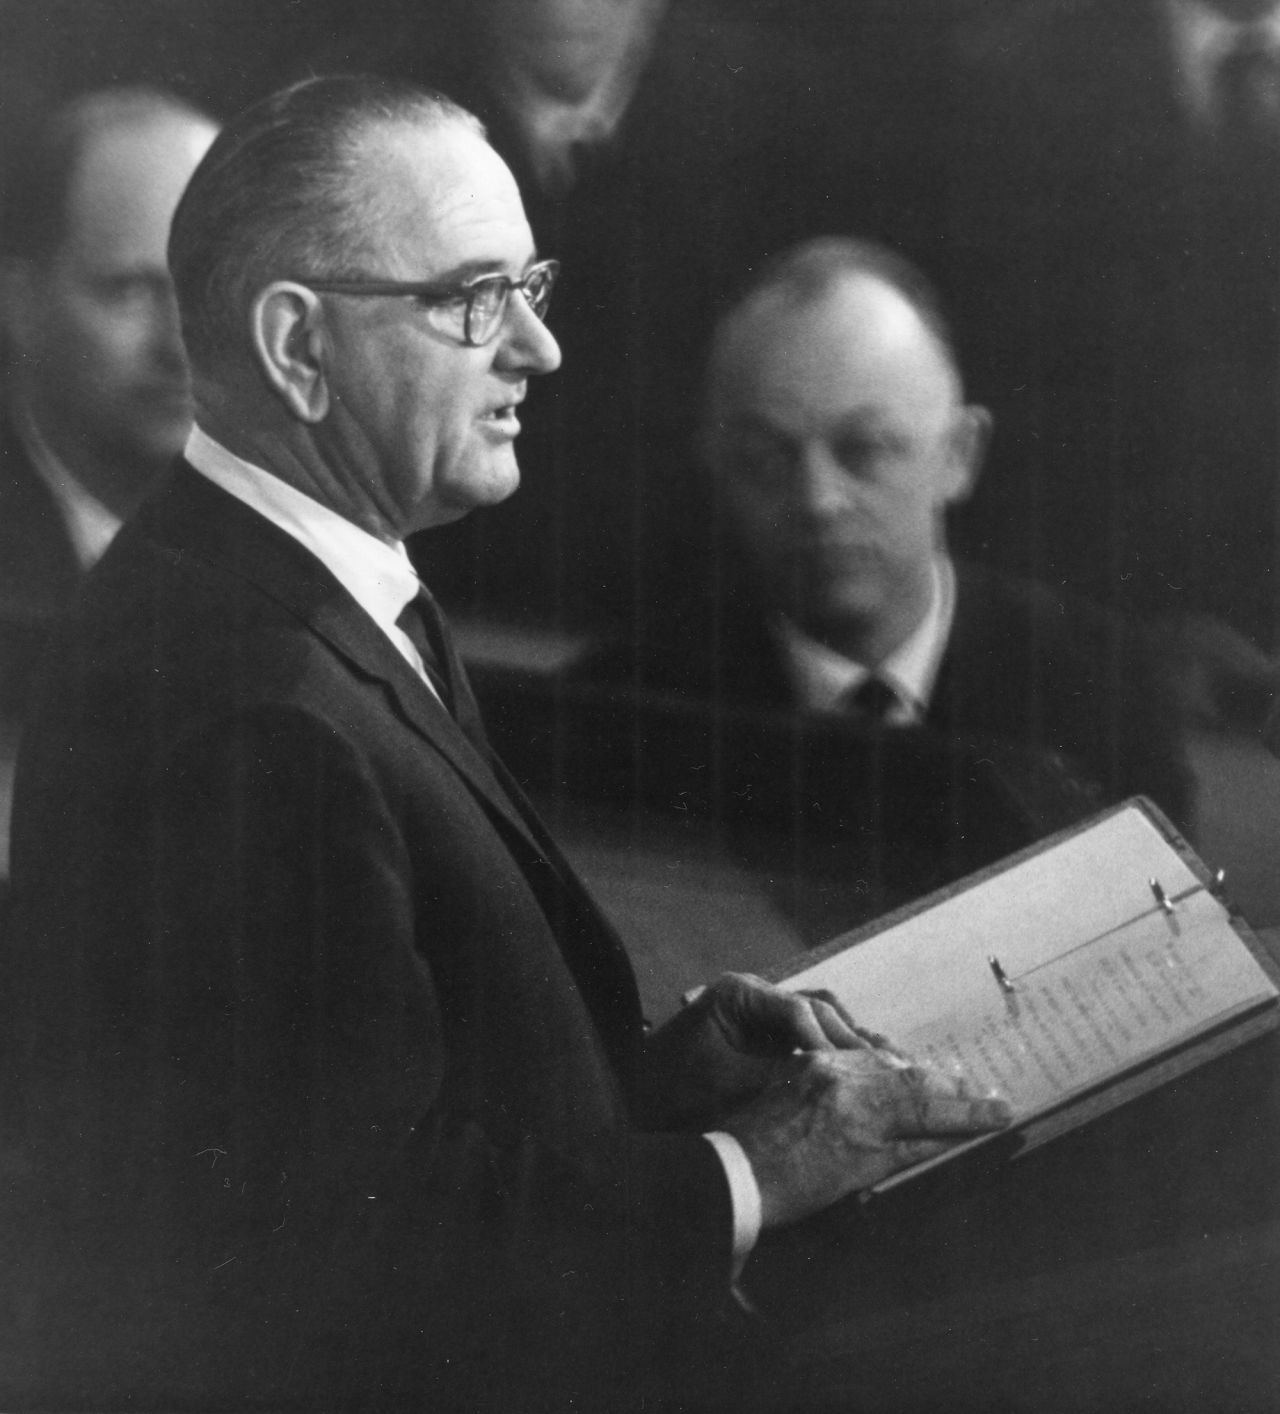 President Lyndon B. Johnson delivers his first State of the Union address in 1964. Sworn in shortly after Kennedy's assassination in November 1963, his first message called on Congress to move forward with Kennedy's plans "not because of our sorrow or sympathy, but because they are right."